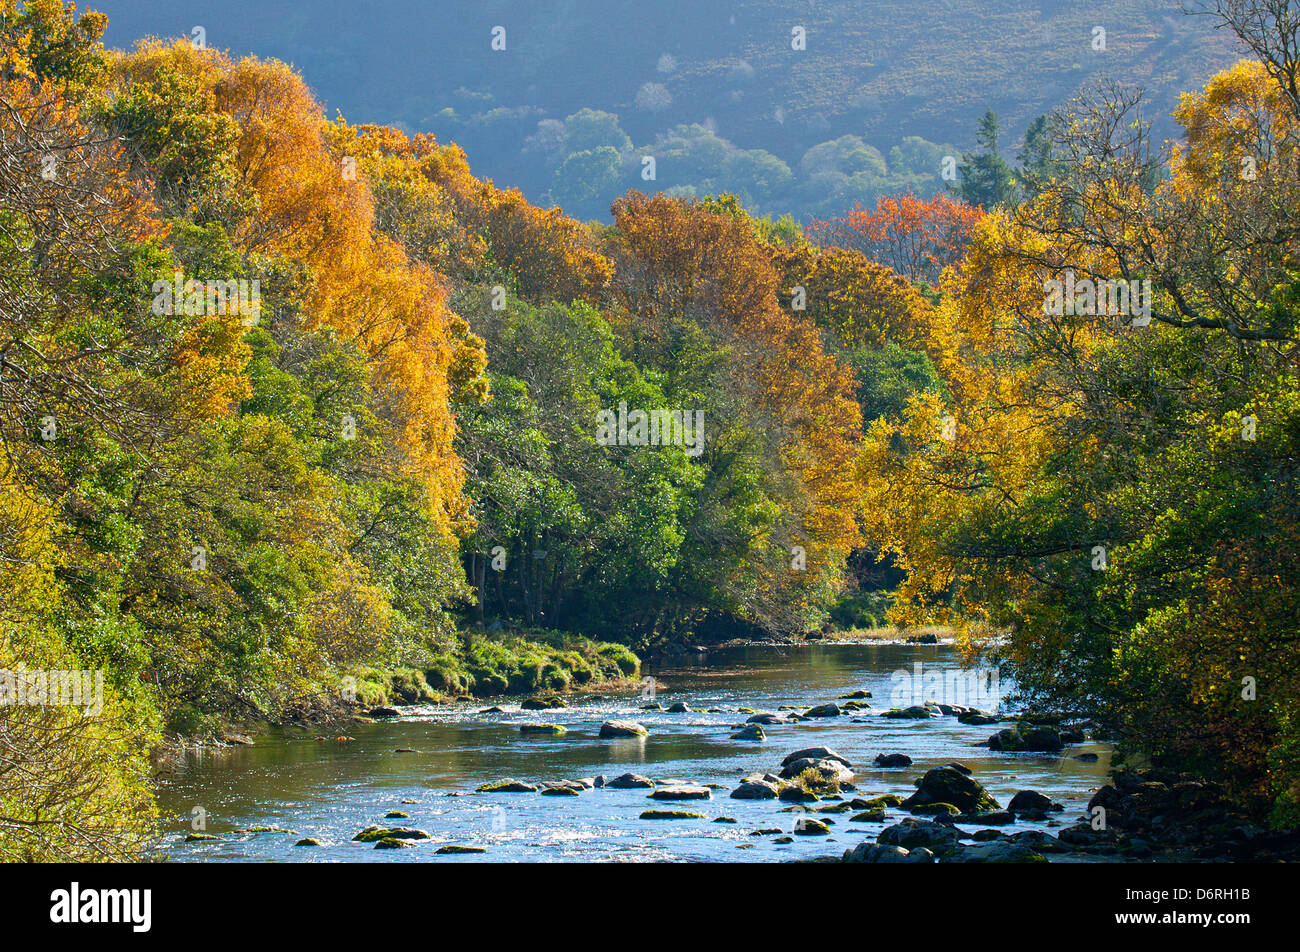 River Wye and autumn leaves, Powys, Wales, UK. Stock Photo